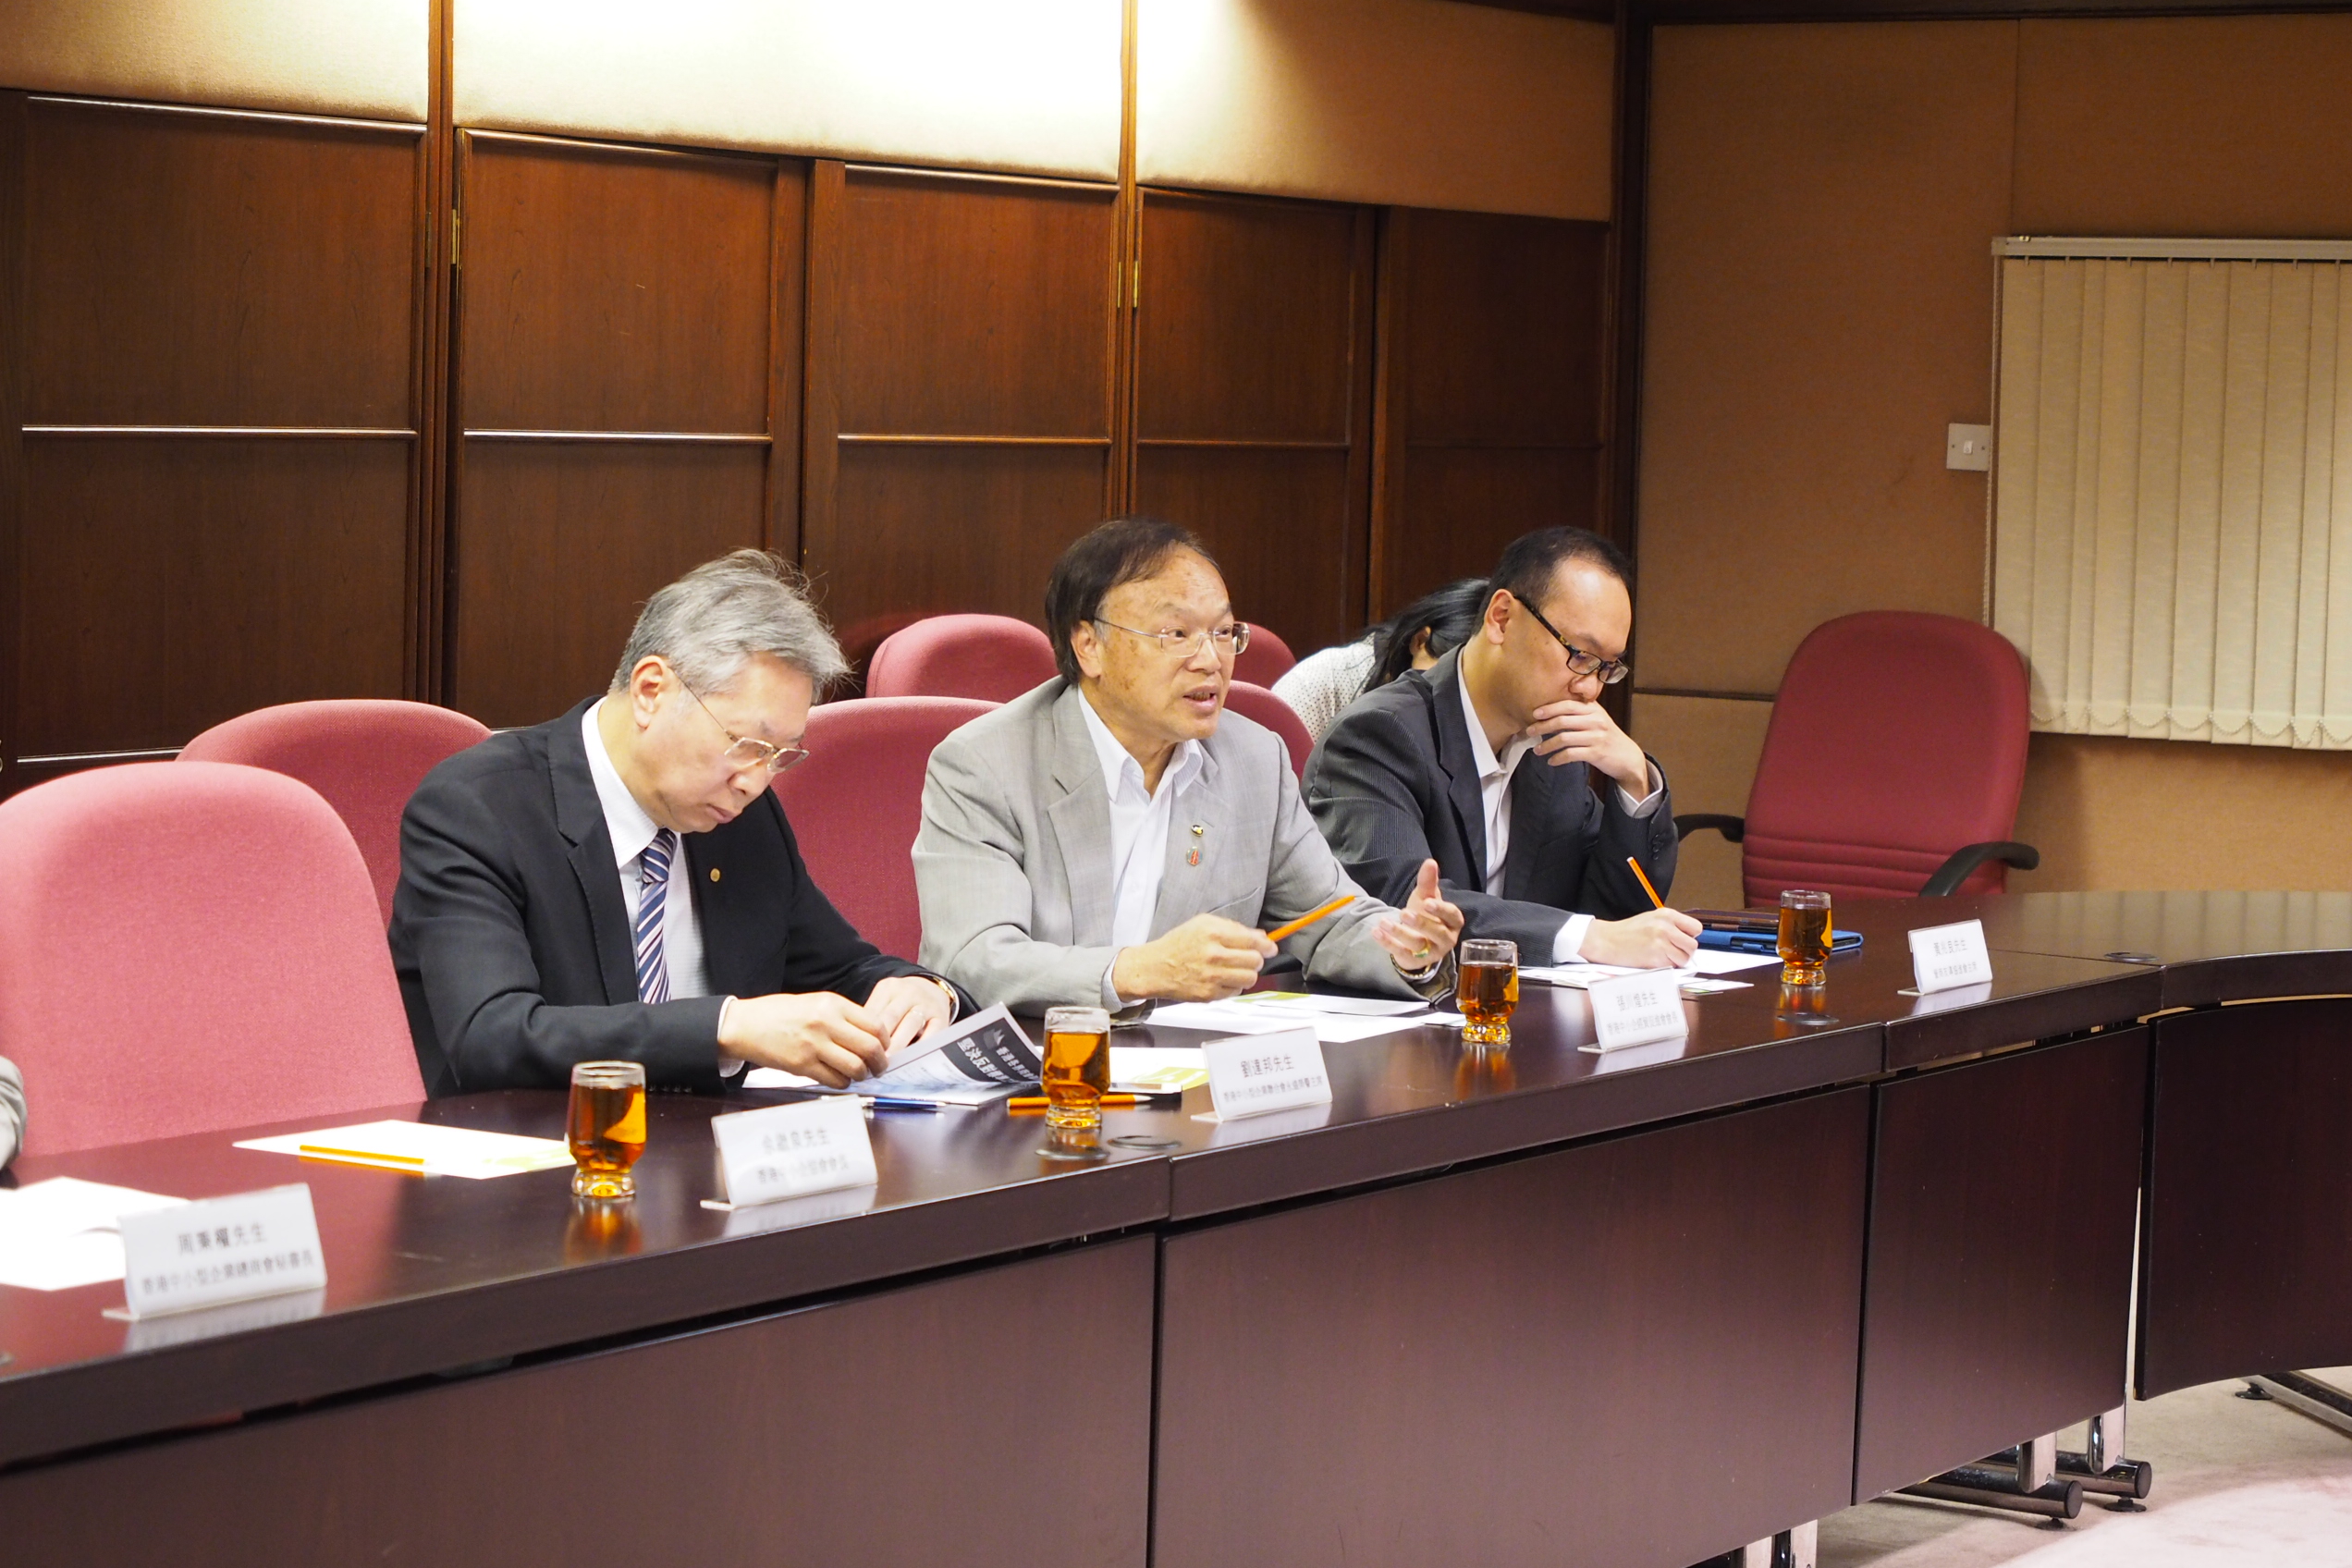 Photo 3: The Small and Medium Enterprises Committee met with local SME organisations on 2 May 2014 to exchange views on standard working hours. A written summary (Chinese only) reflecting the views of local SMEs on standard working hours was then passed to the Standard Working Hours Committee for reference.